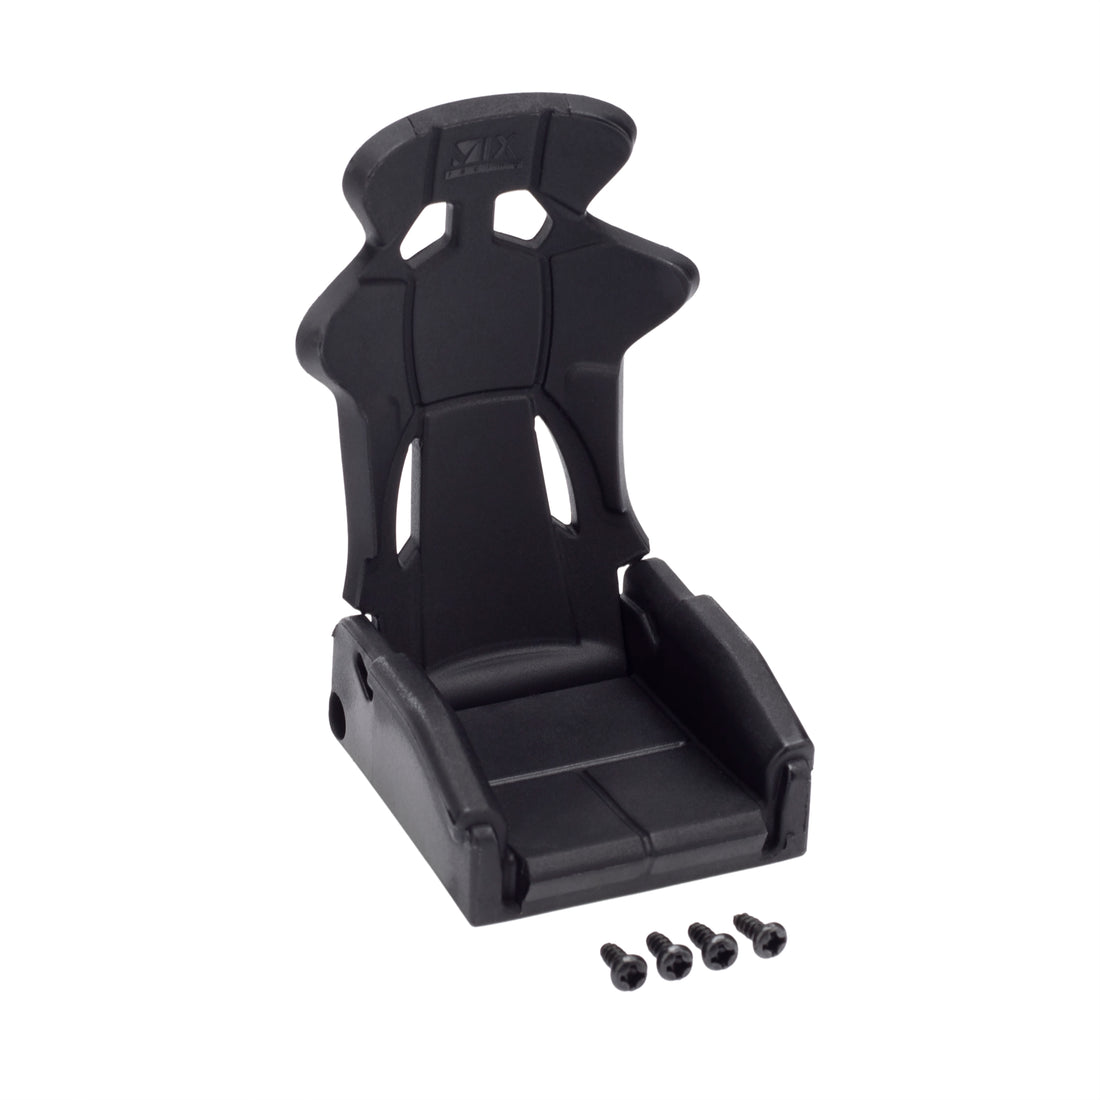 Simulation Driving Seat for SCX10, TRX-4-4